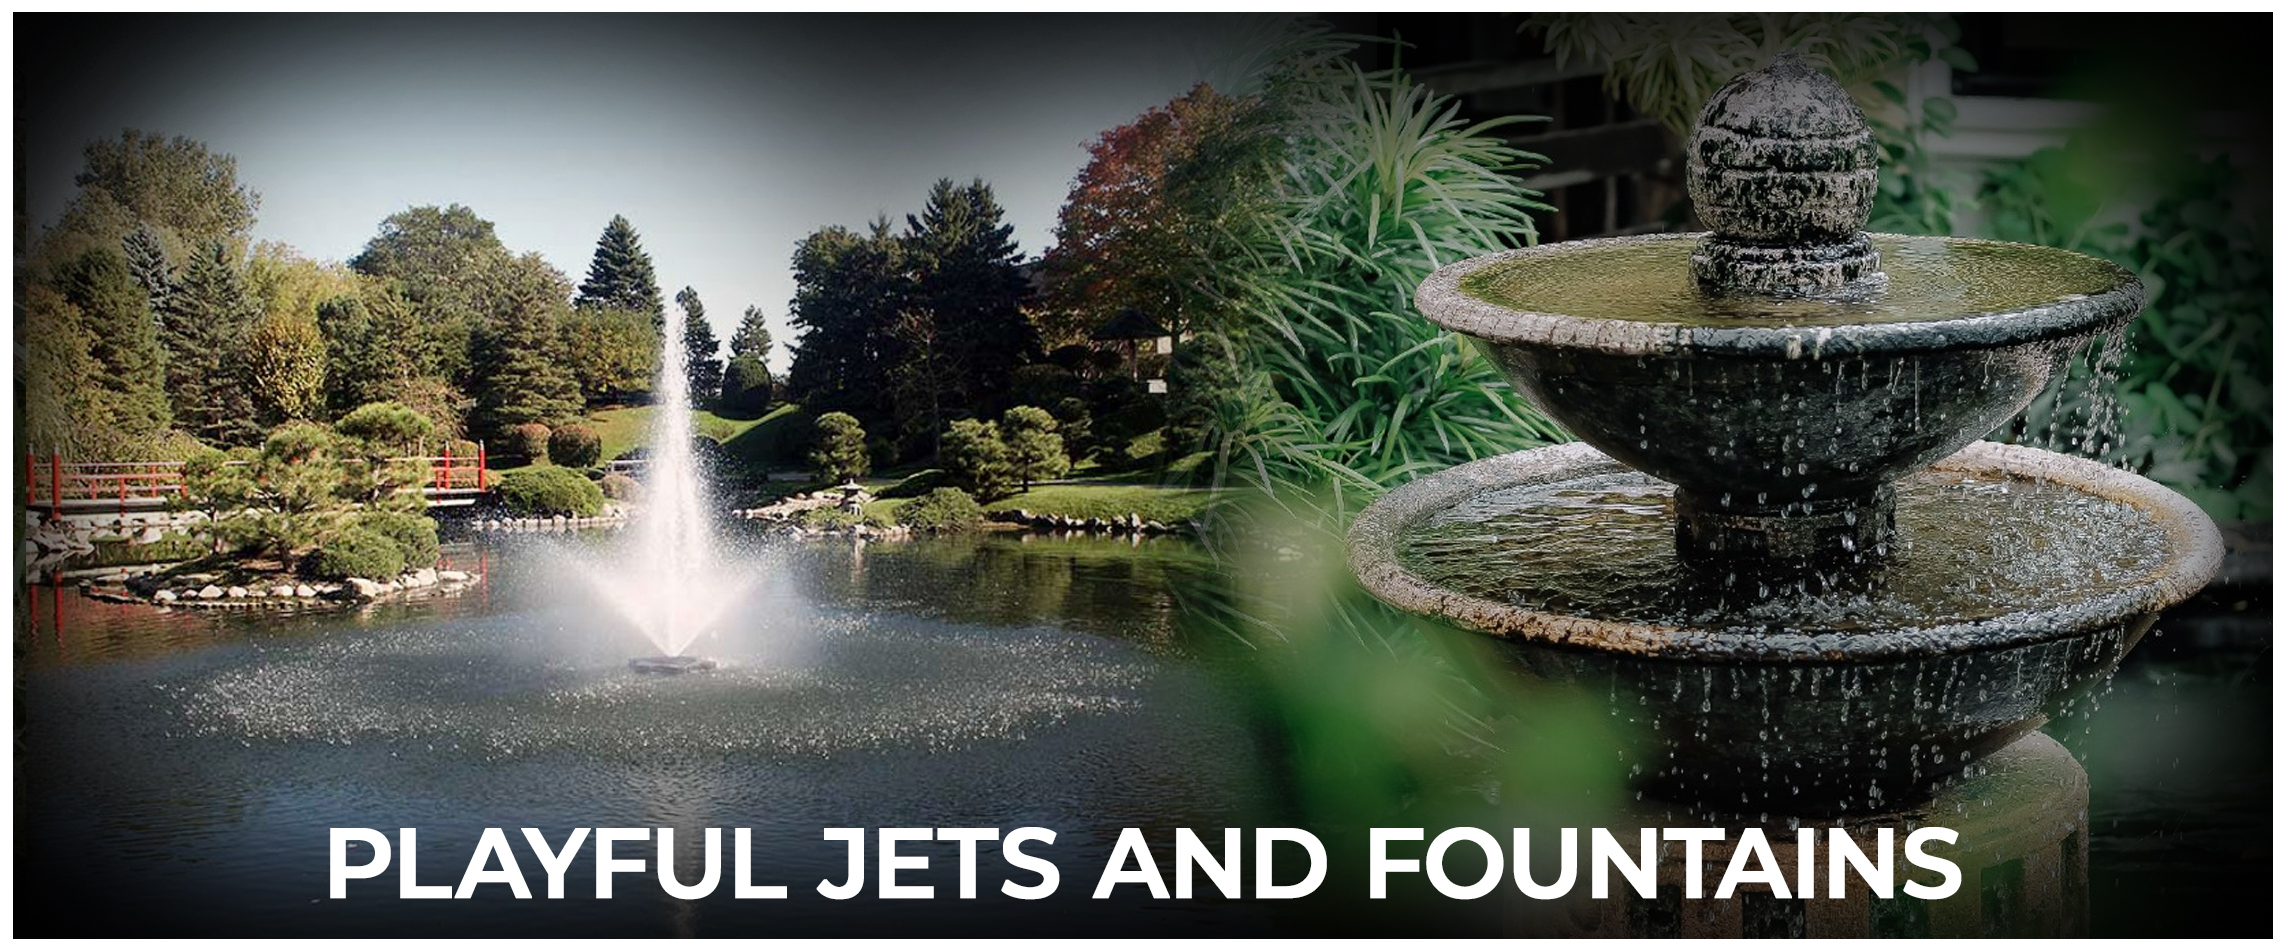  Playful Jets and Fountains